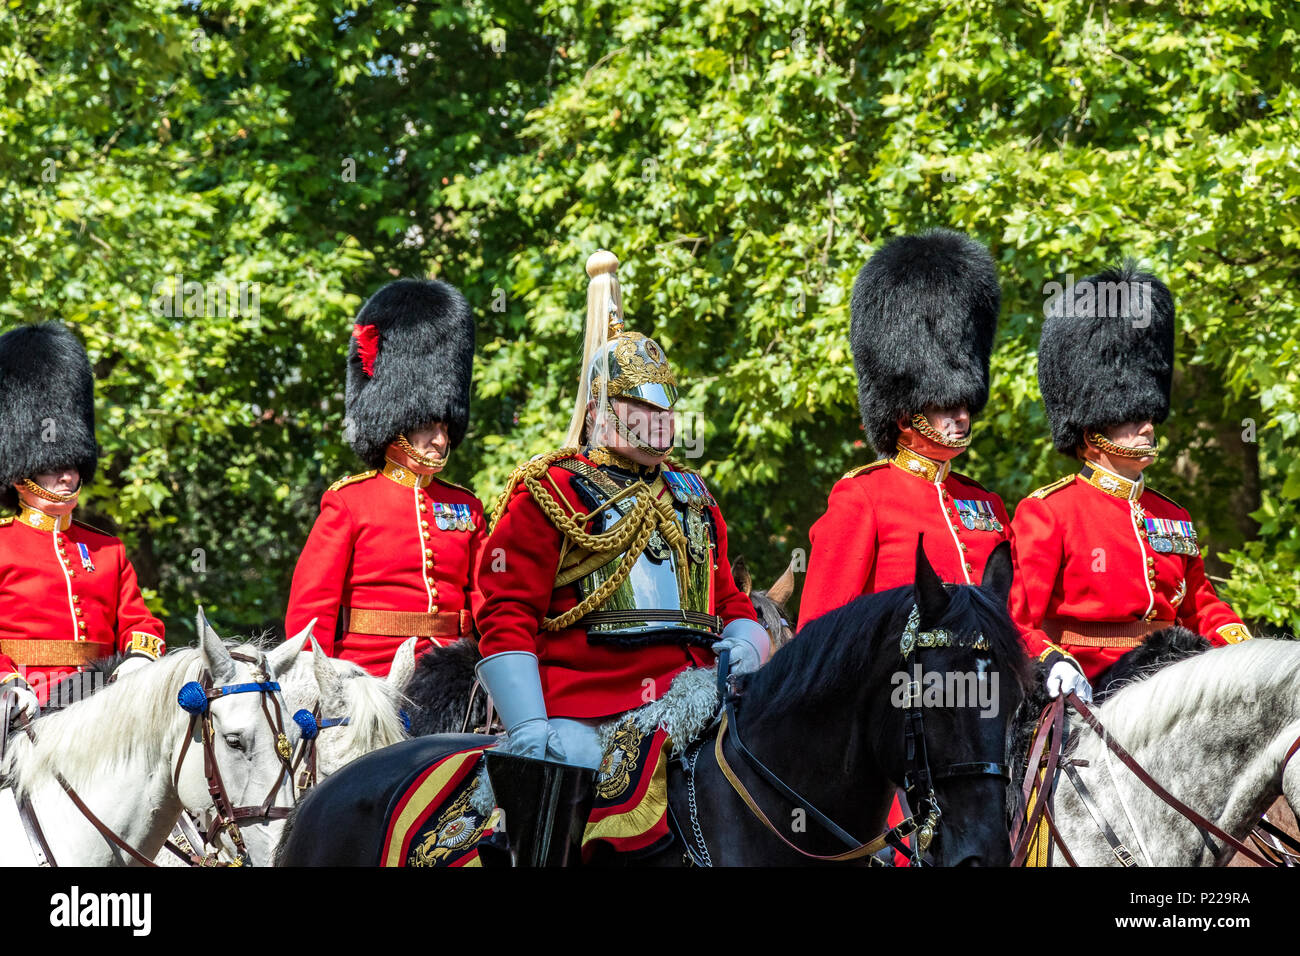 Field Marshal Lord Guthrie riding along the Mall at Trooping  The Colour also known as The Queens Birthday Parade,London, UK 2018 Stock Photo